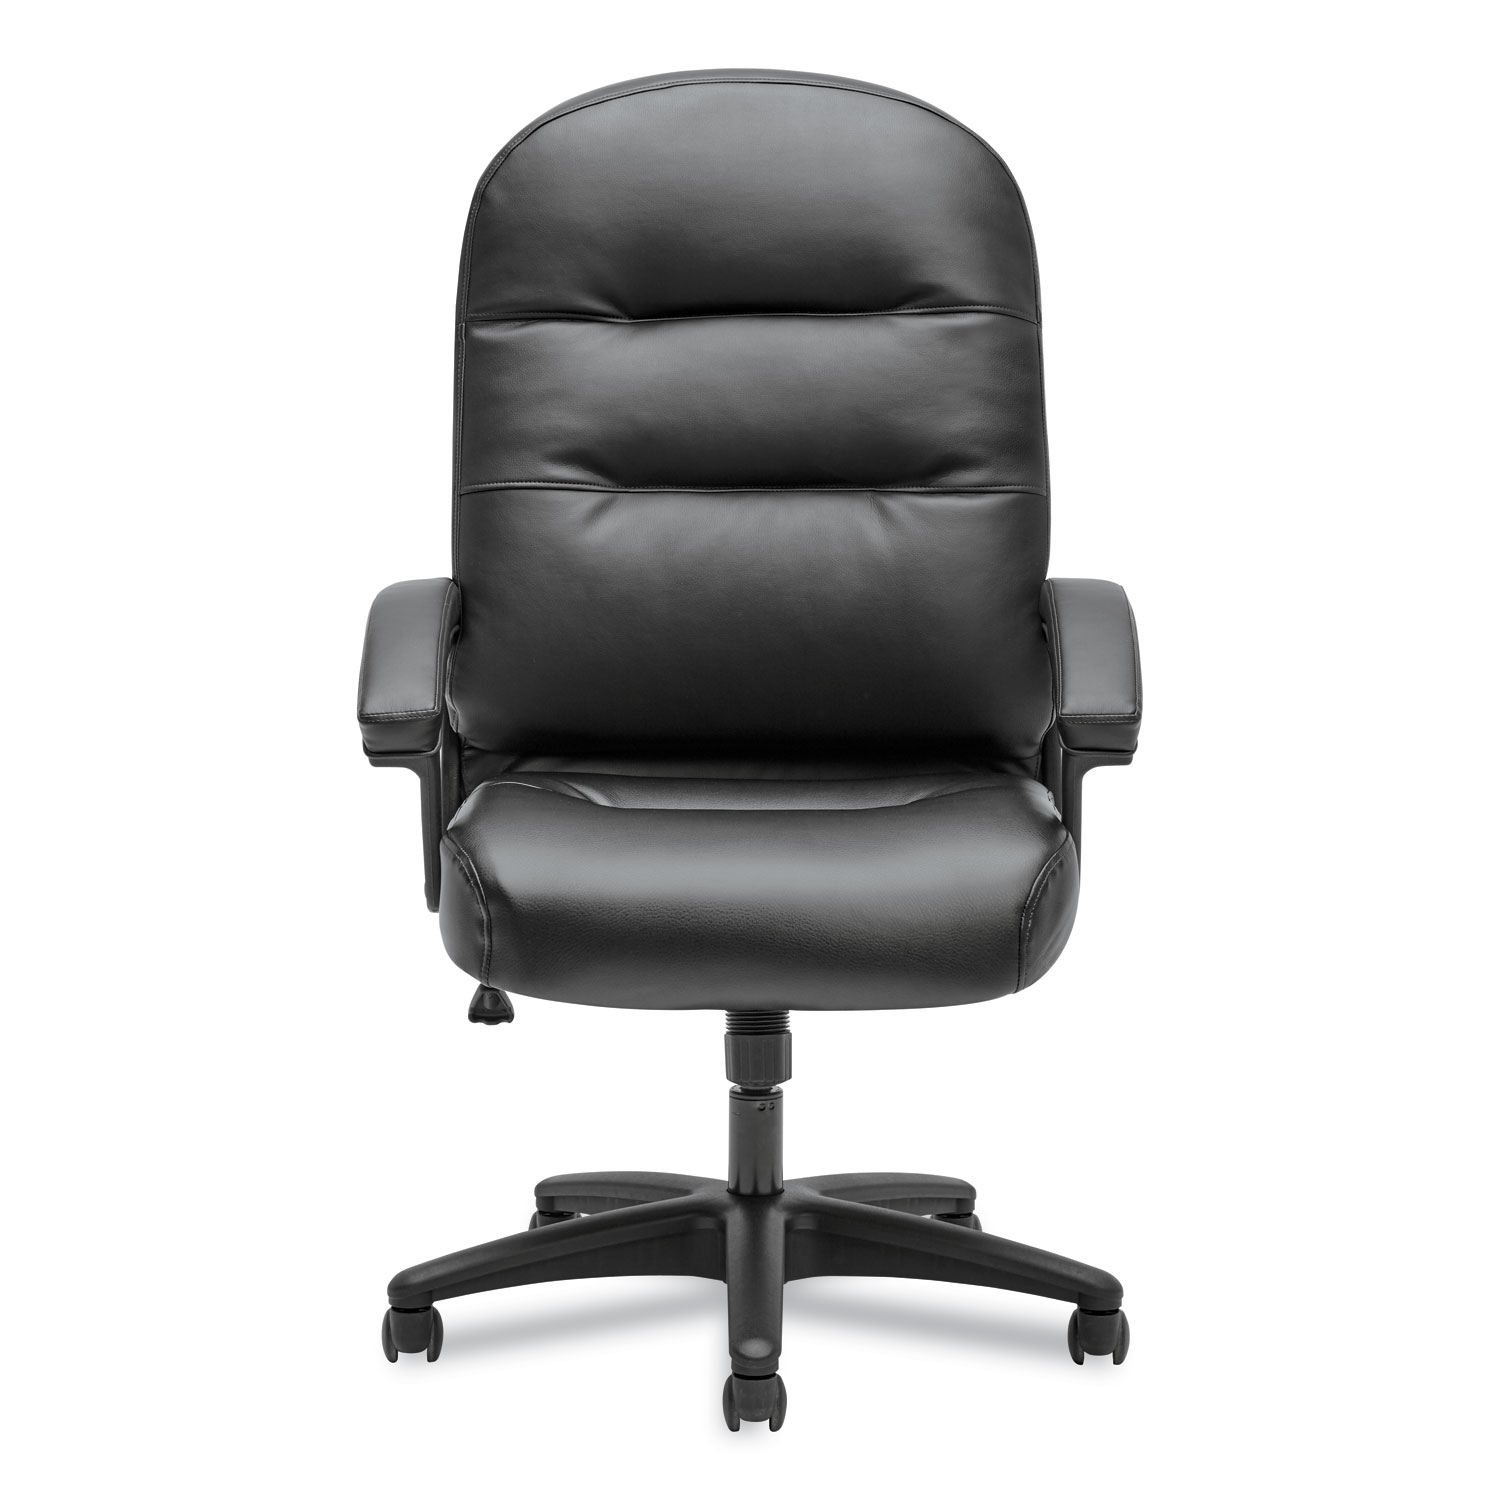 HON Pillow-Soft Executive Chair - High-Back Leather Computer Chair for Office Desk, Black (H2095)